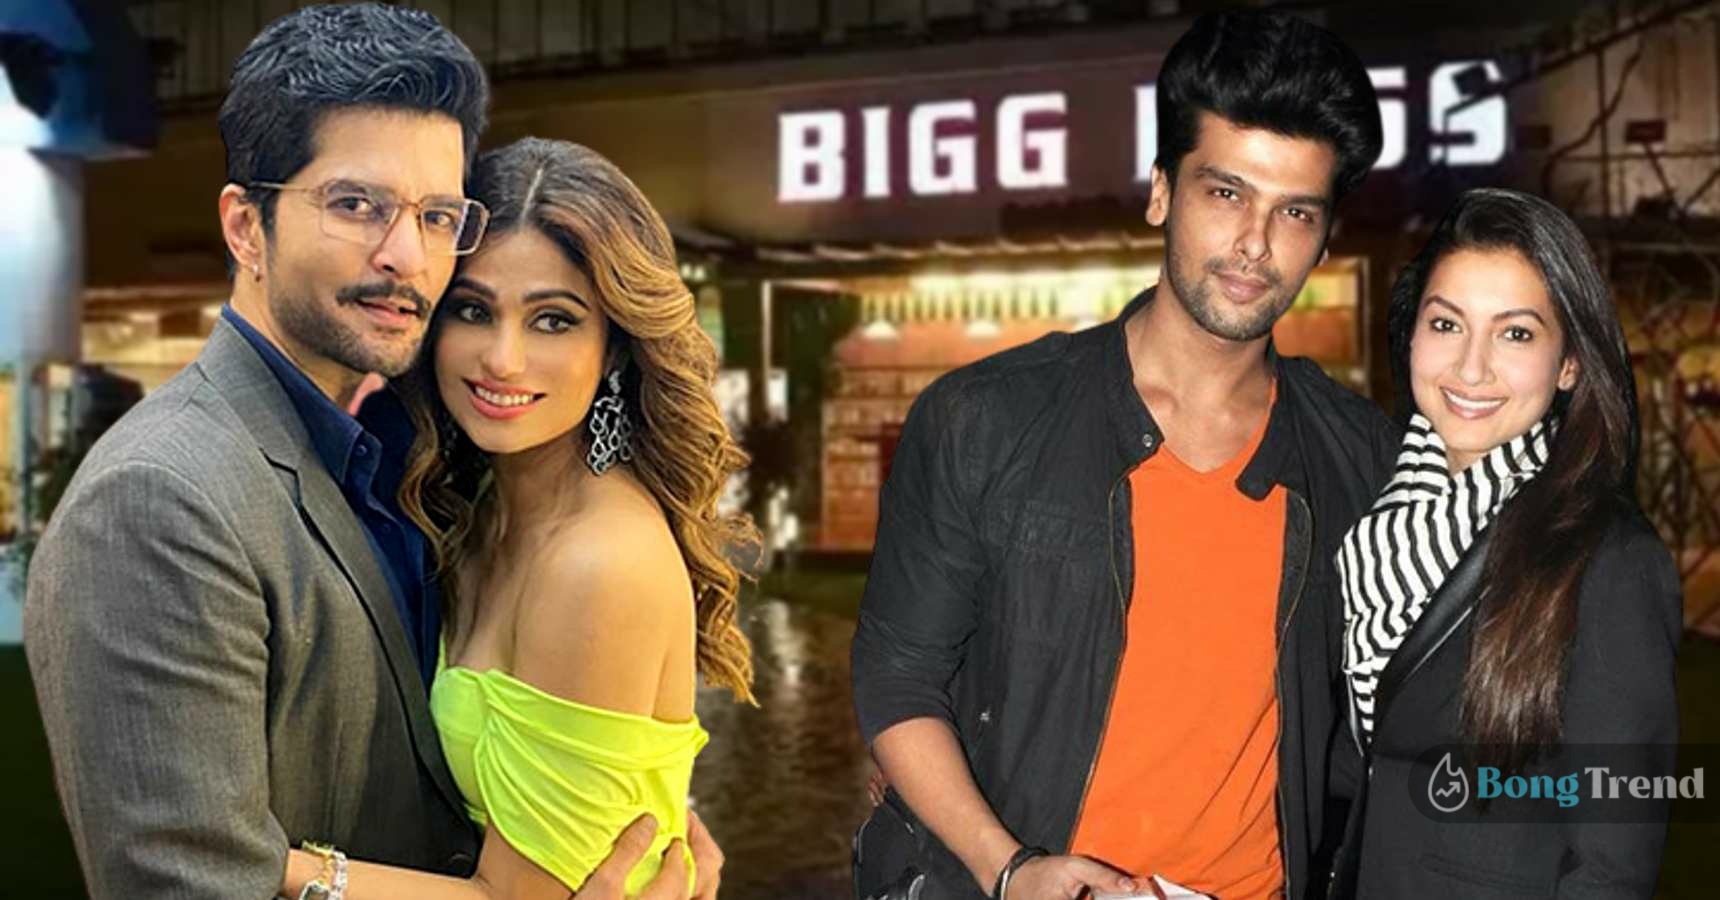 5 Celebrity couples who married on bigboss but lated broke up